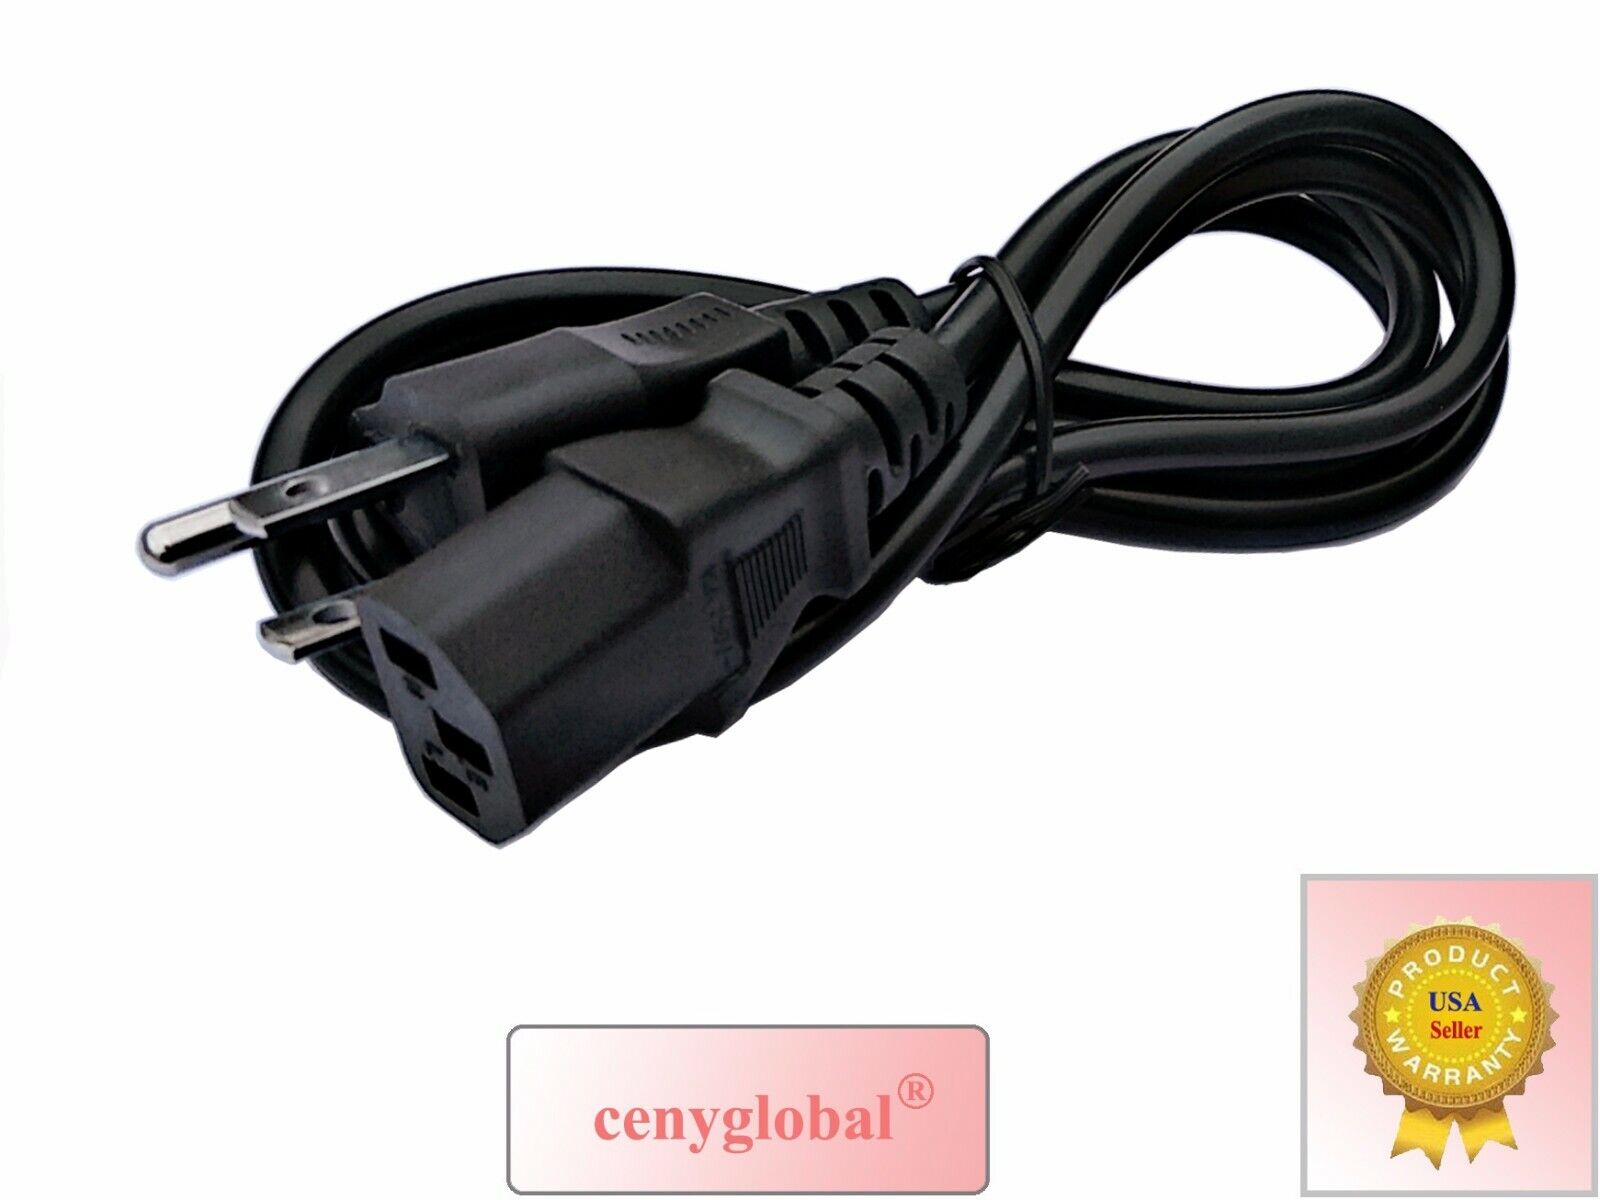 AC Power Cord Cable For Dynex LED TV 19 22 24 26 32 37 40 42 46 55 inch Series